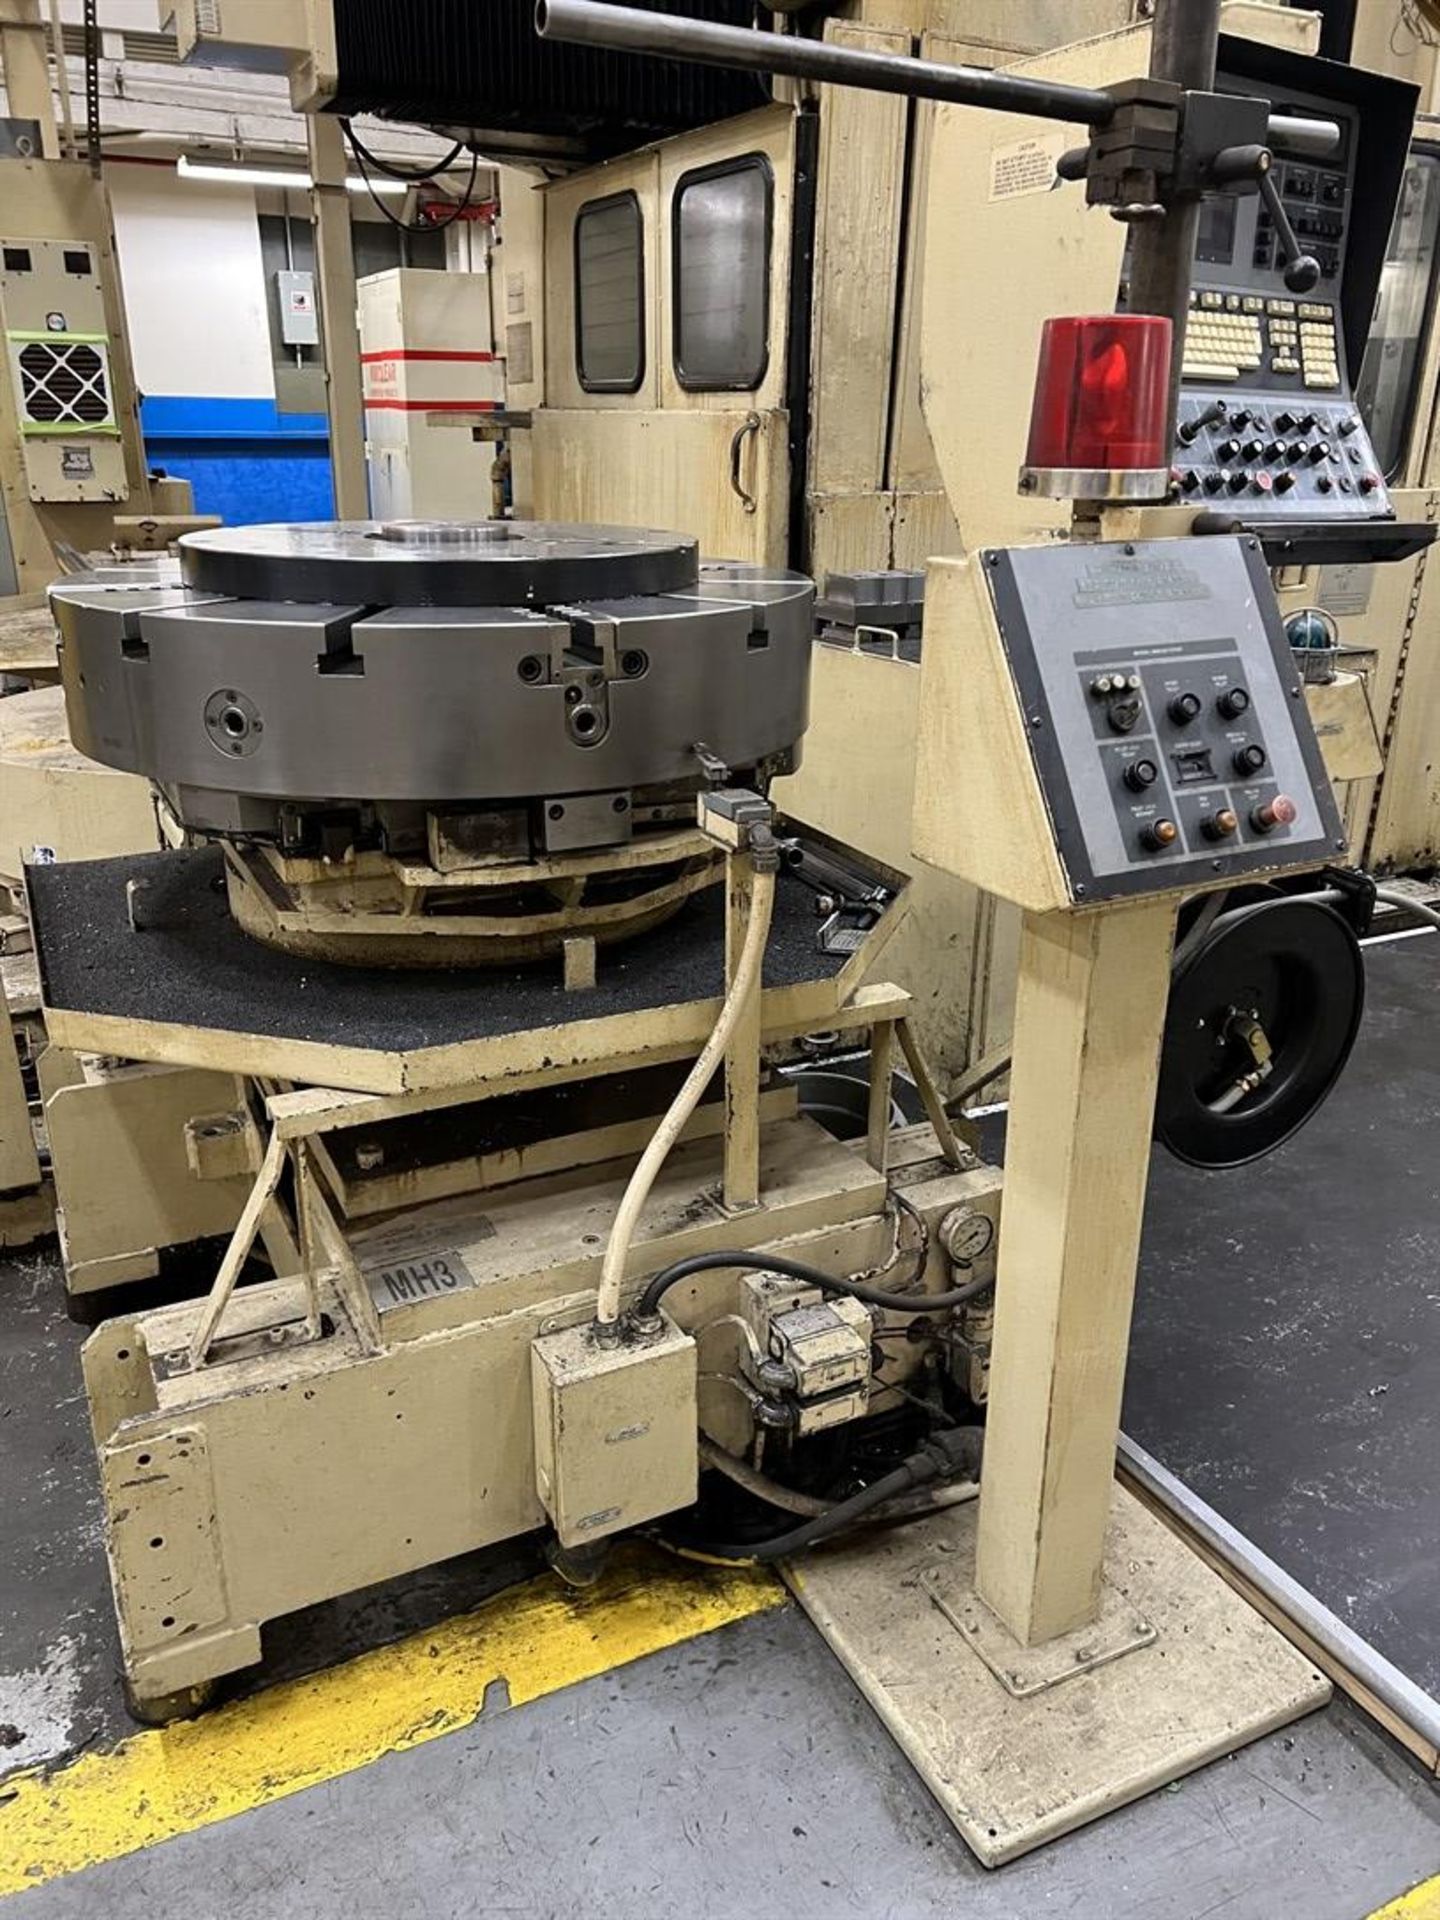 GIDDINGS & LEWIS 36 VTC Twin Pallet Vertical Turning Center with Milling, s/n 511-137-90, G & L - Image 2 of 14